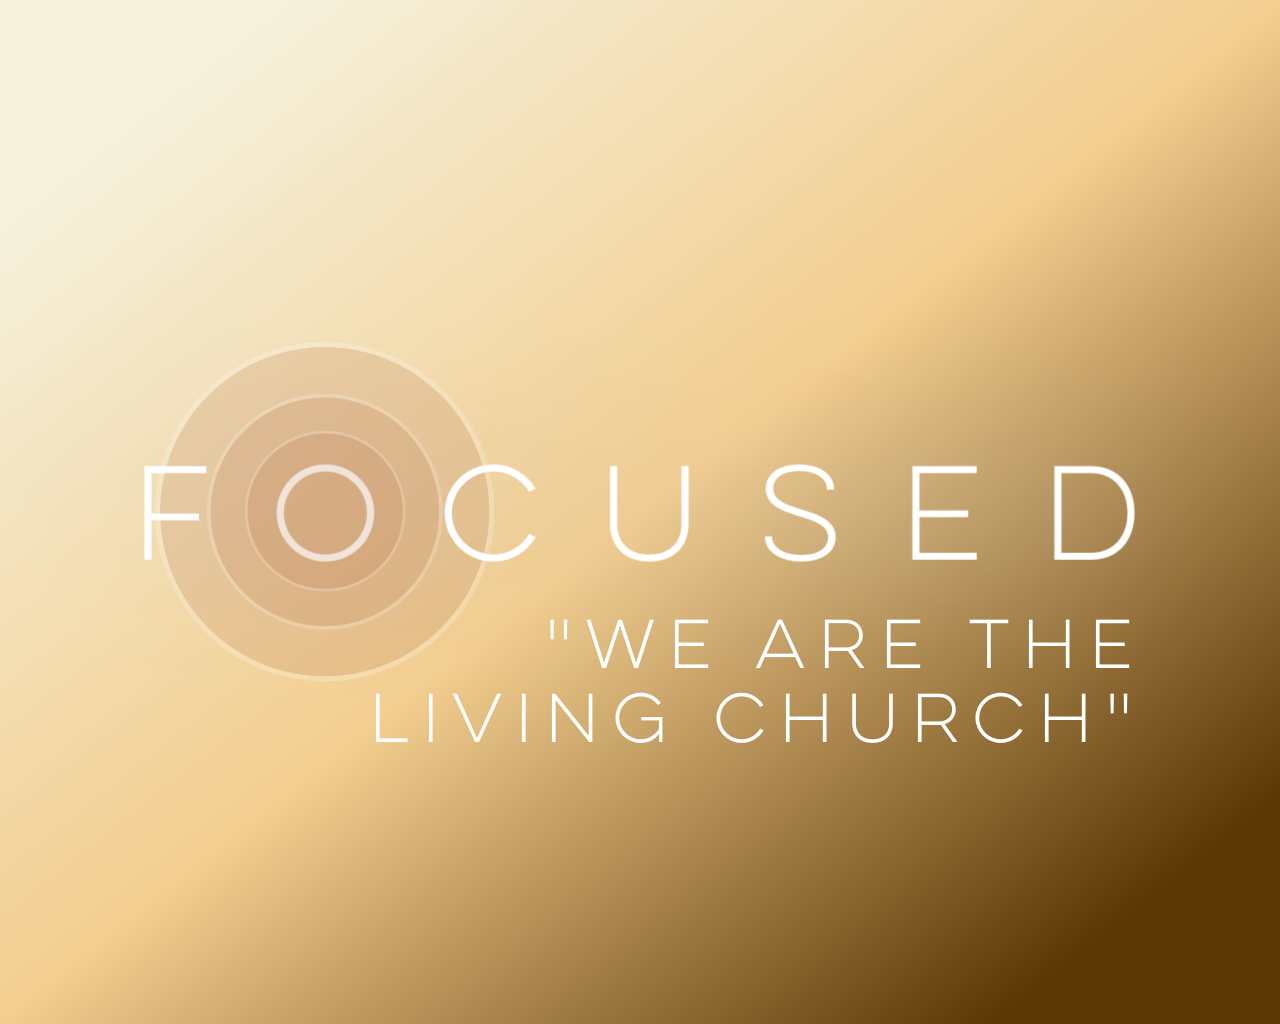 We Are the Living Church